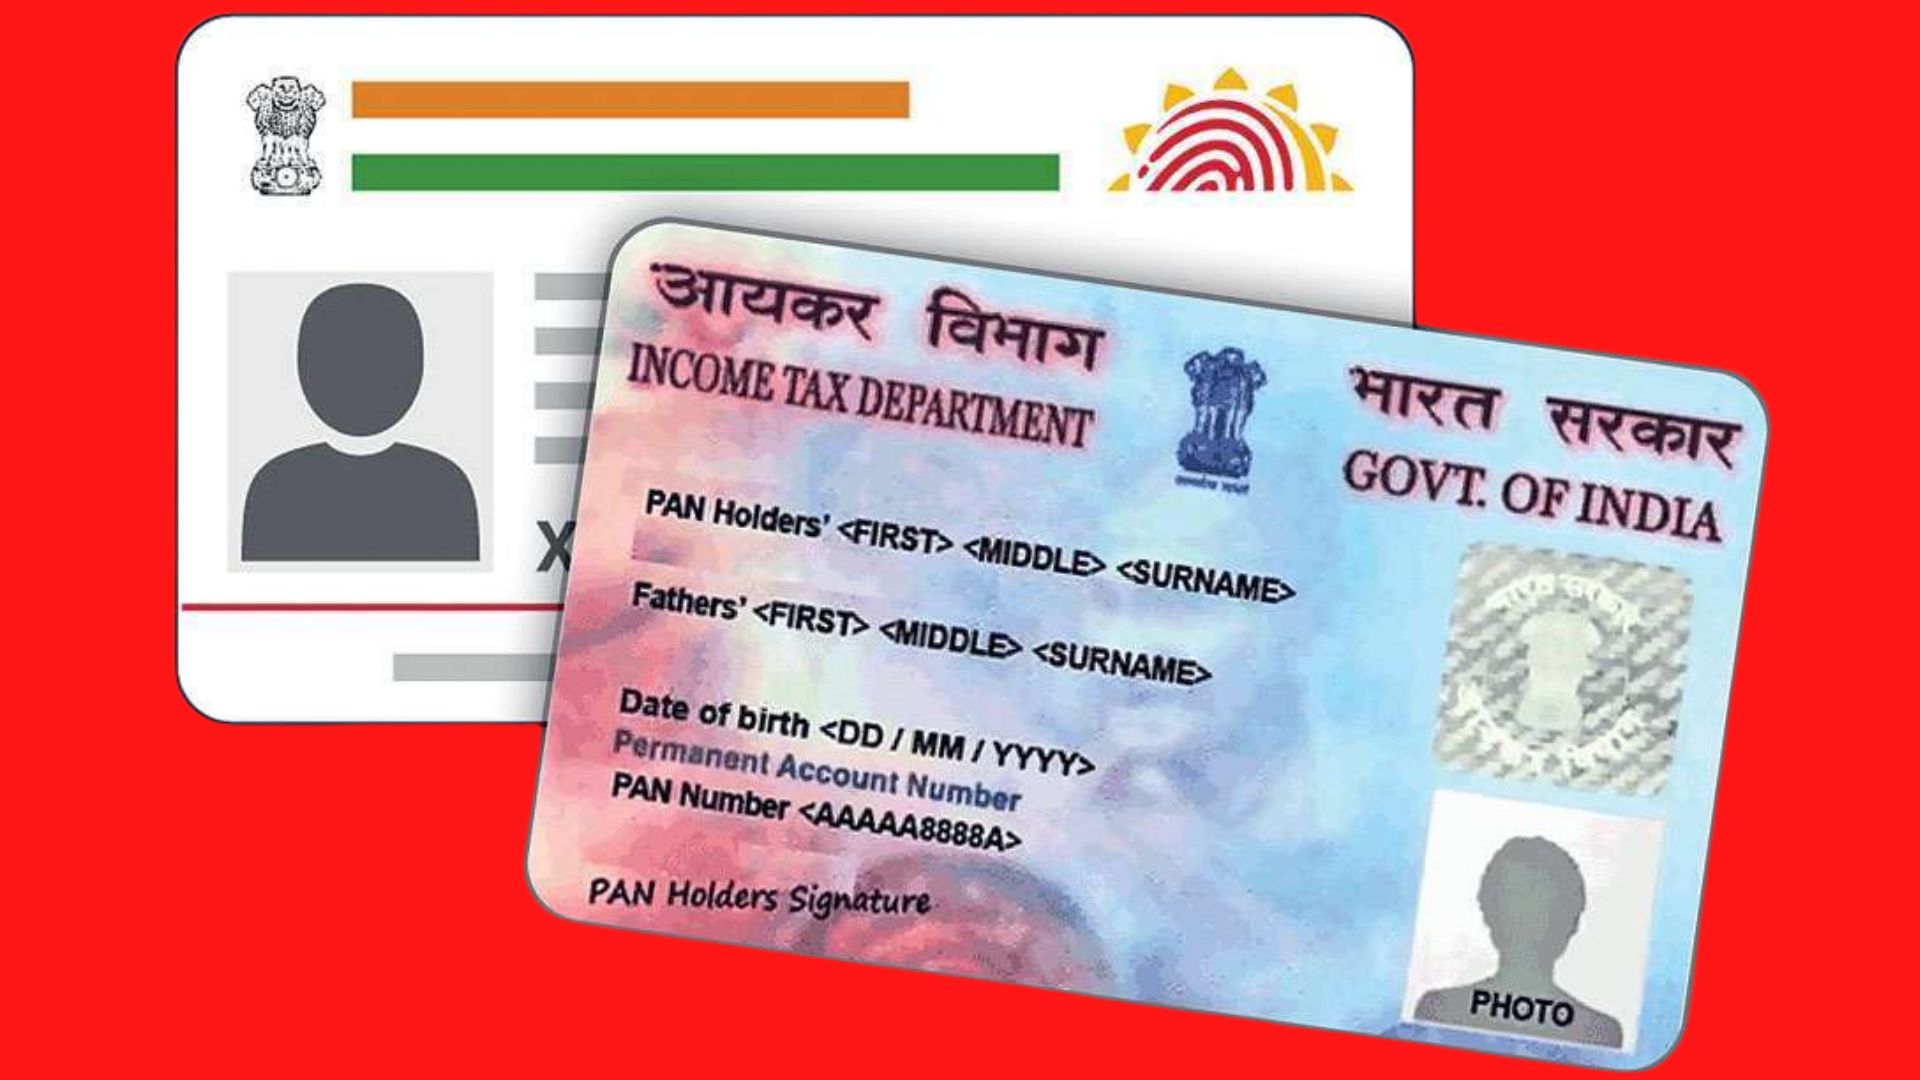 Is It Possible To File ITR Without Linking The Aadhaar And Pan Card